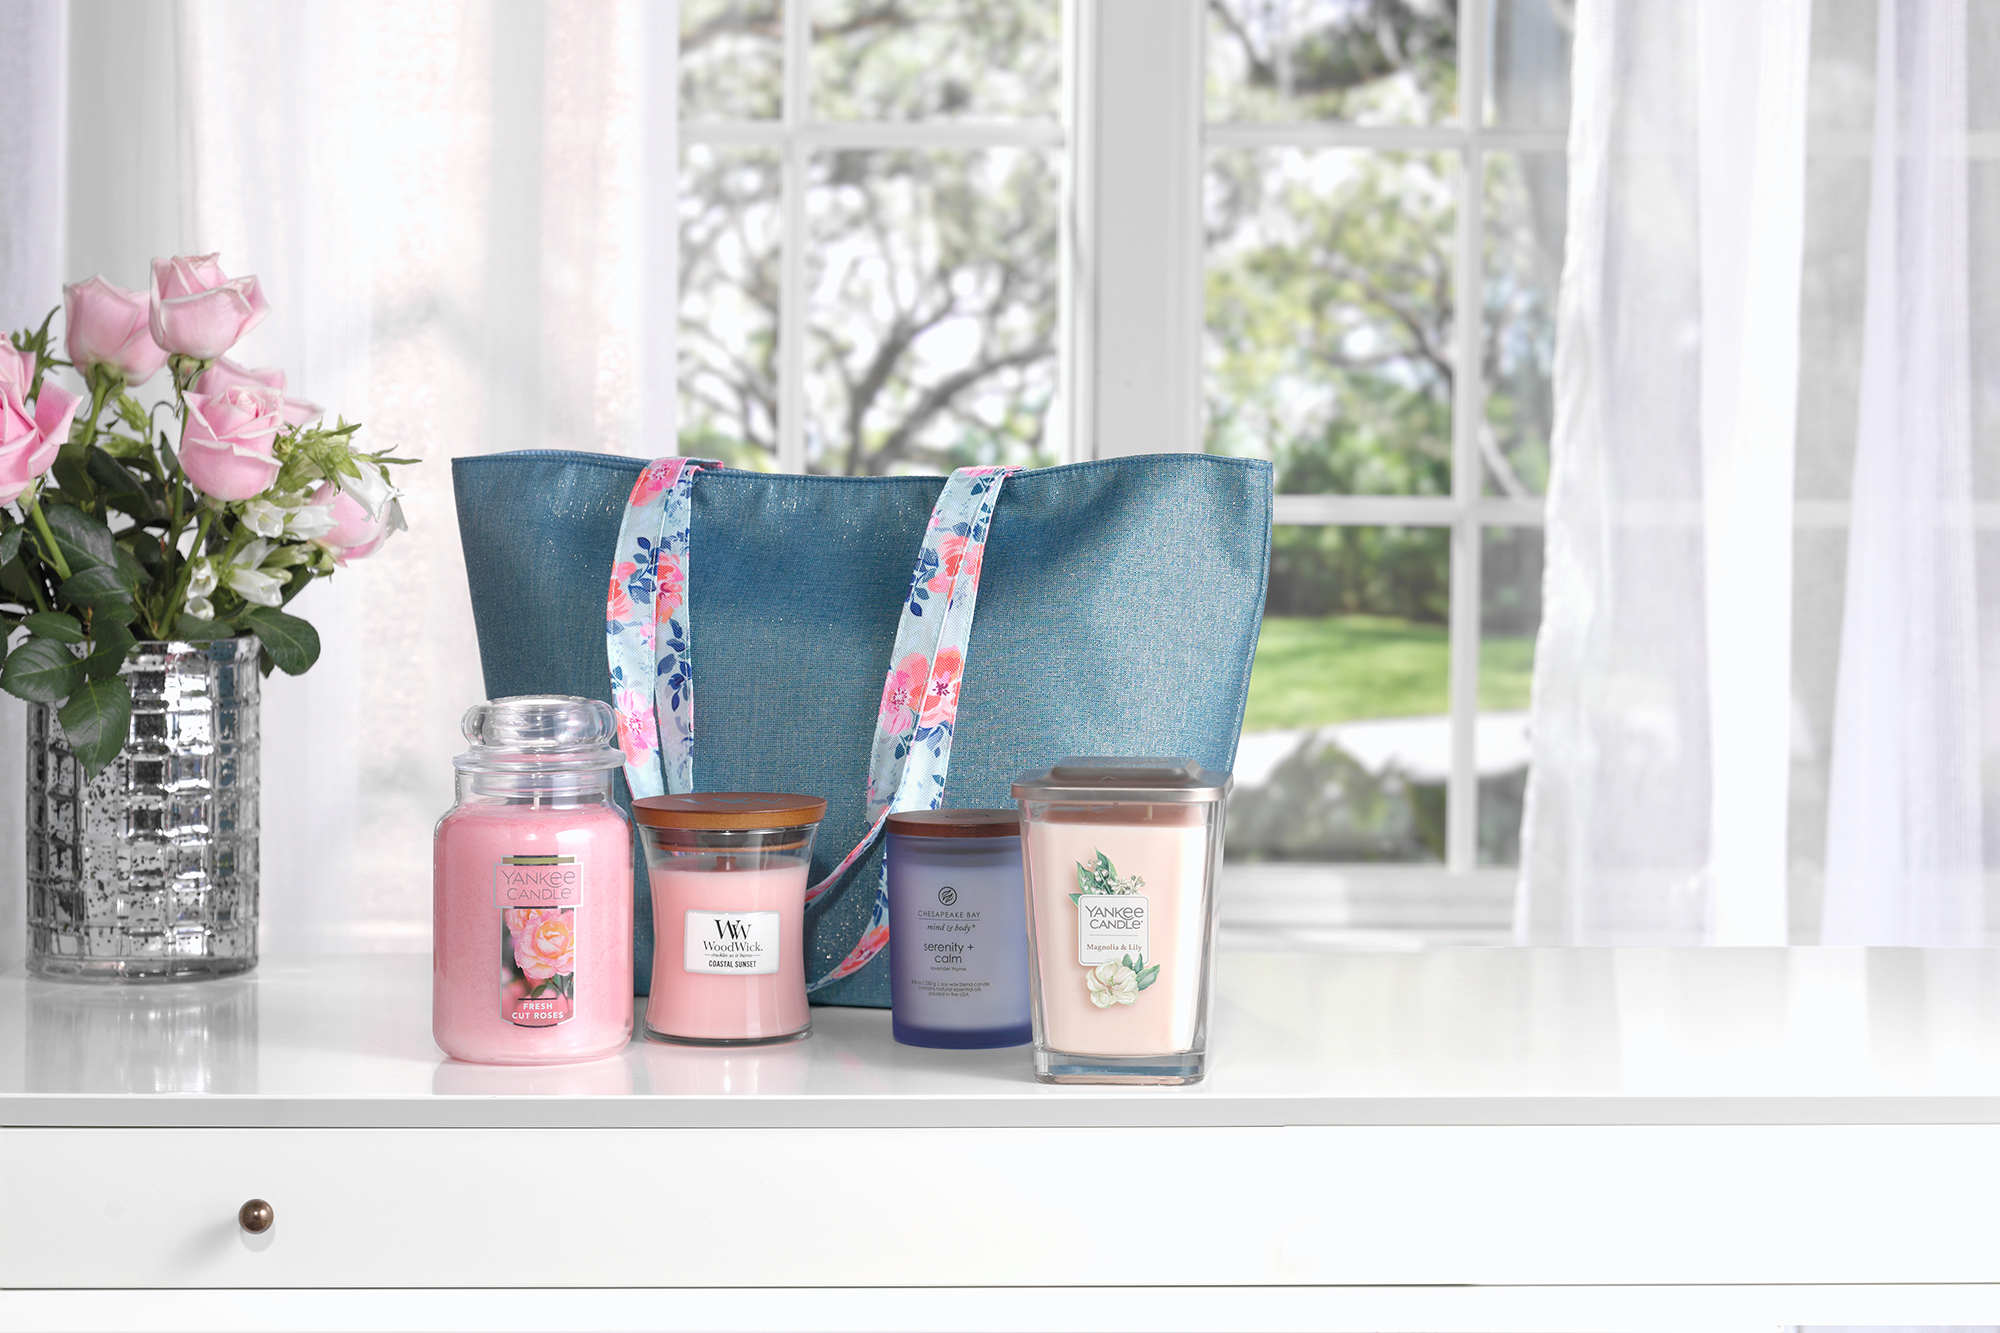 Mother's Day candle gift set – Share & Care Candles